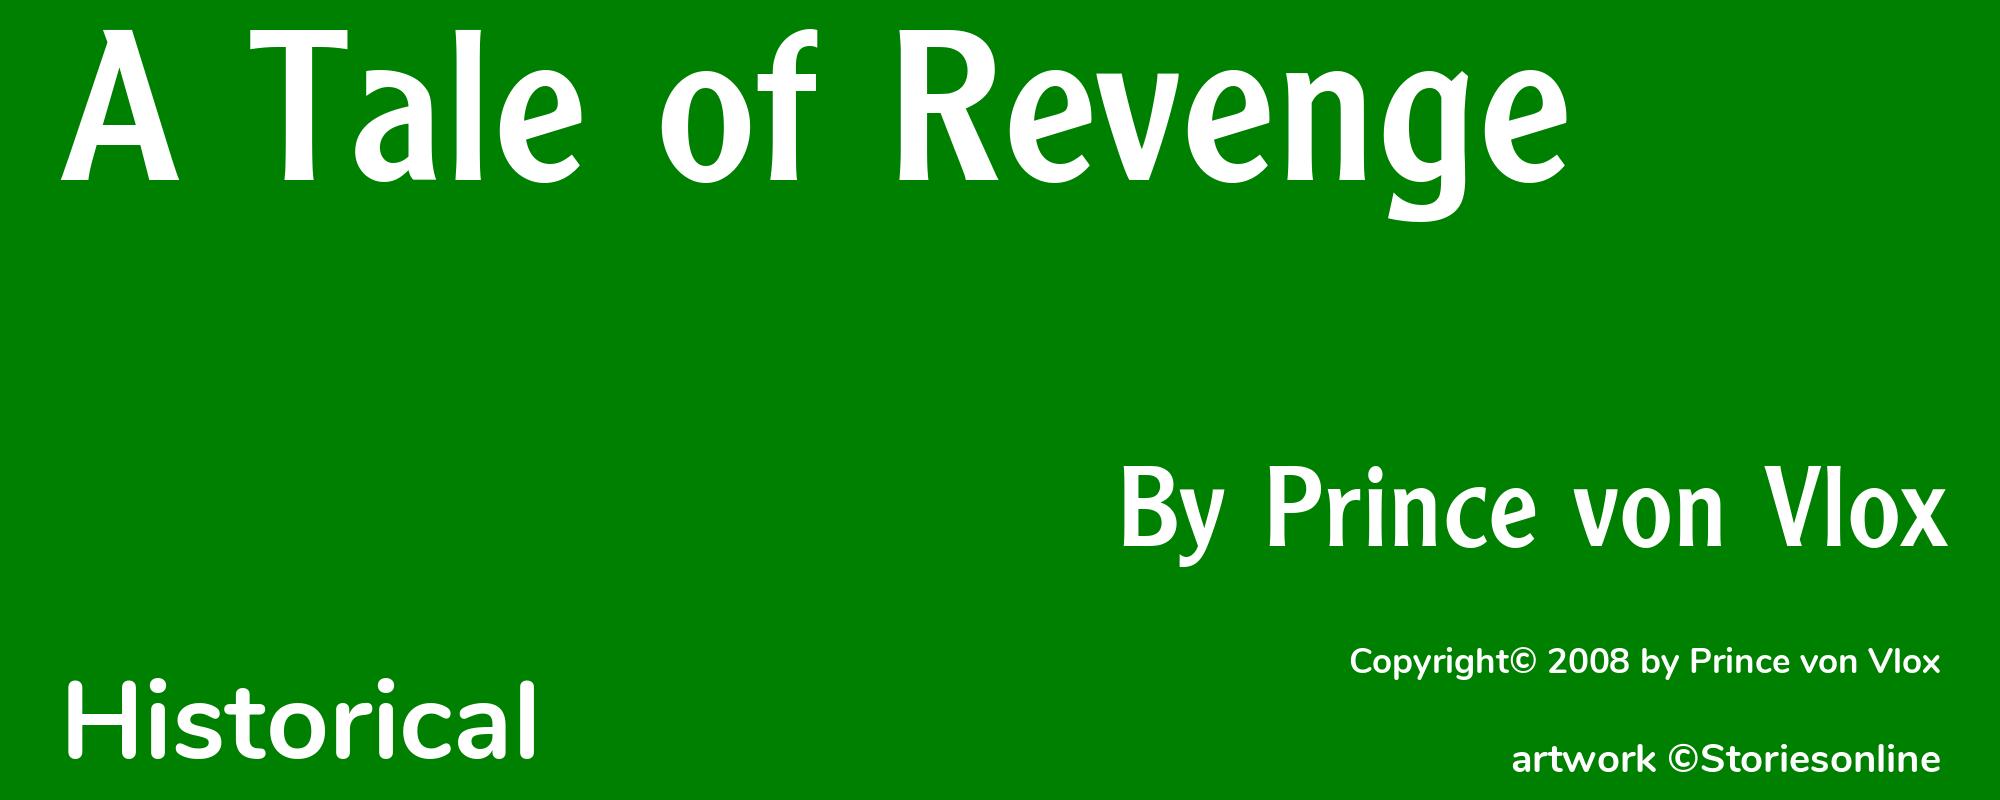 A Tale of Revenge - Cover